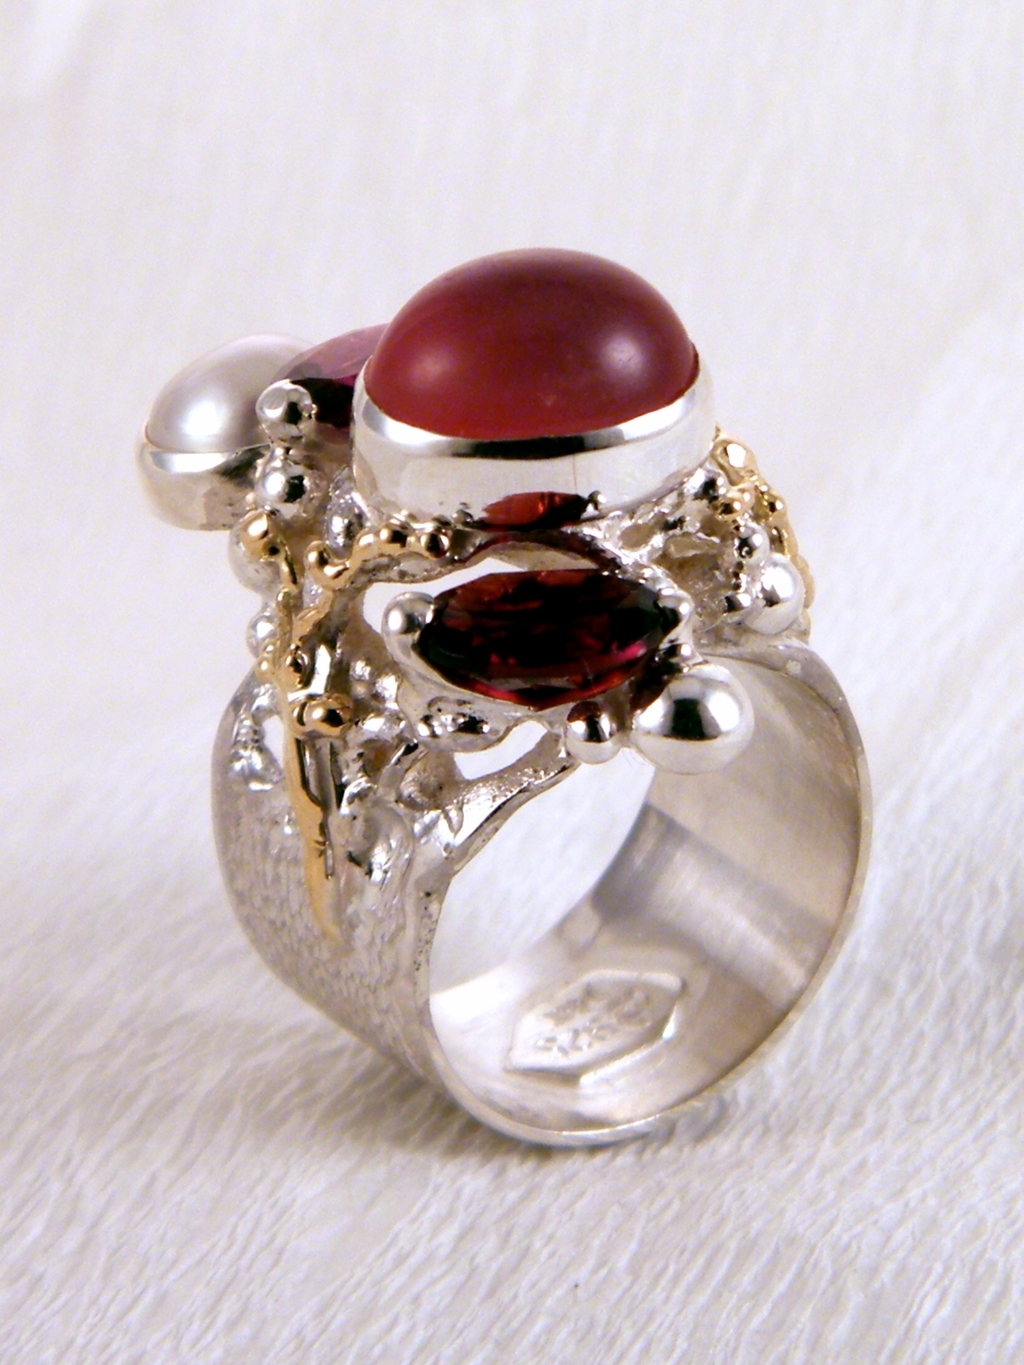 Gregory Pyra Piro Band Ring #6271 in Sterling Silver and 14k Gold with Garnet, Moonstone, and Pearl